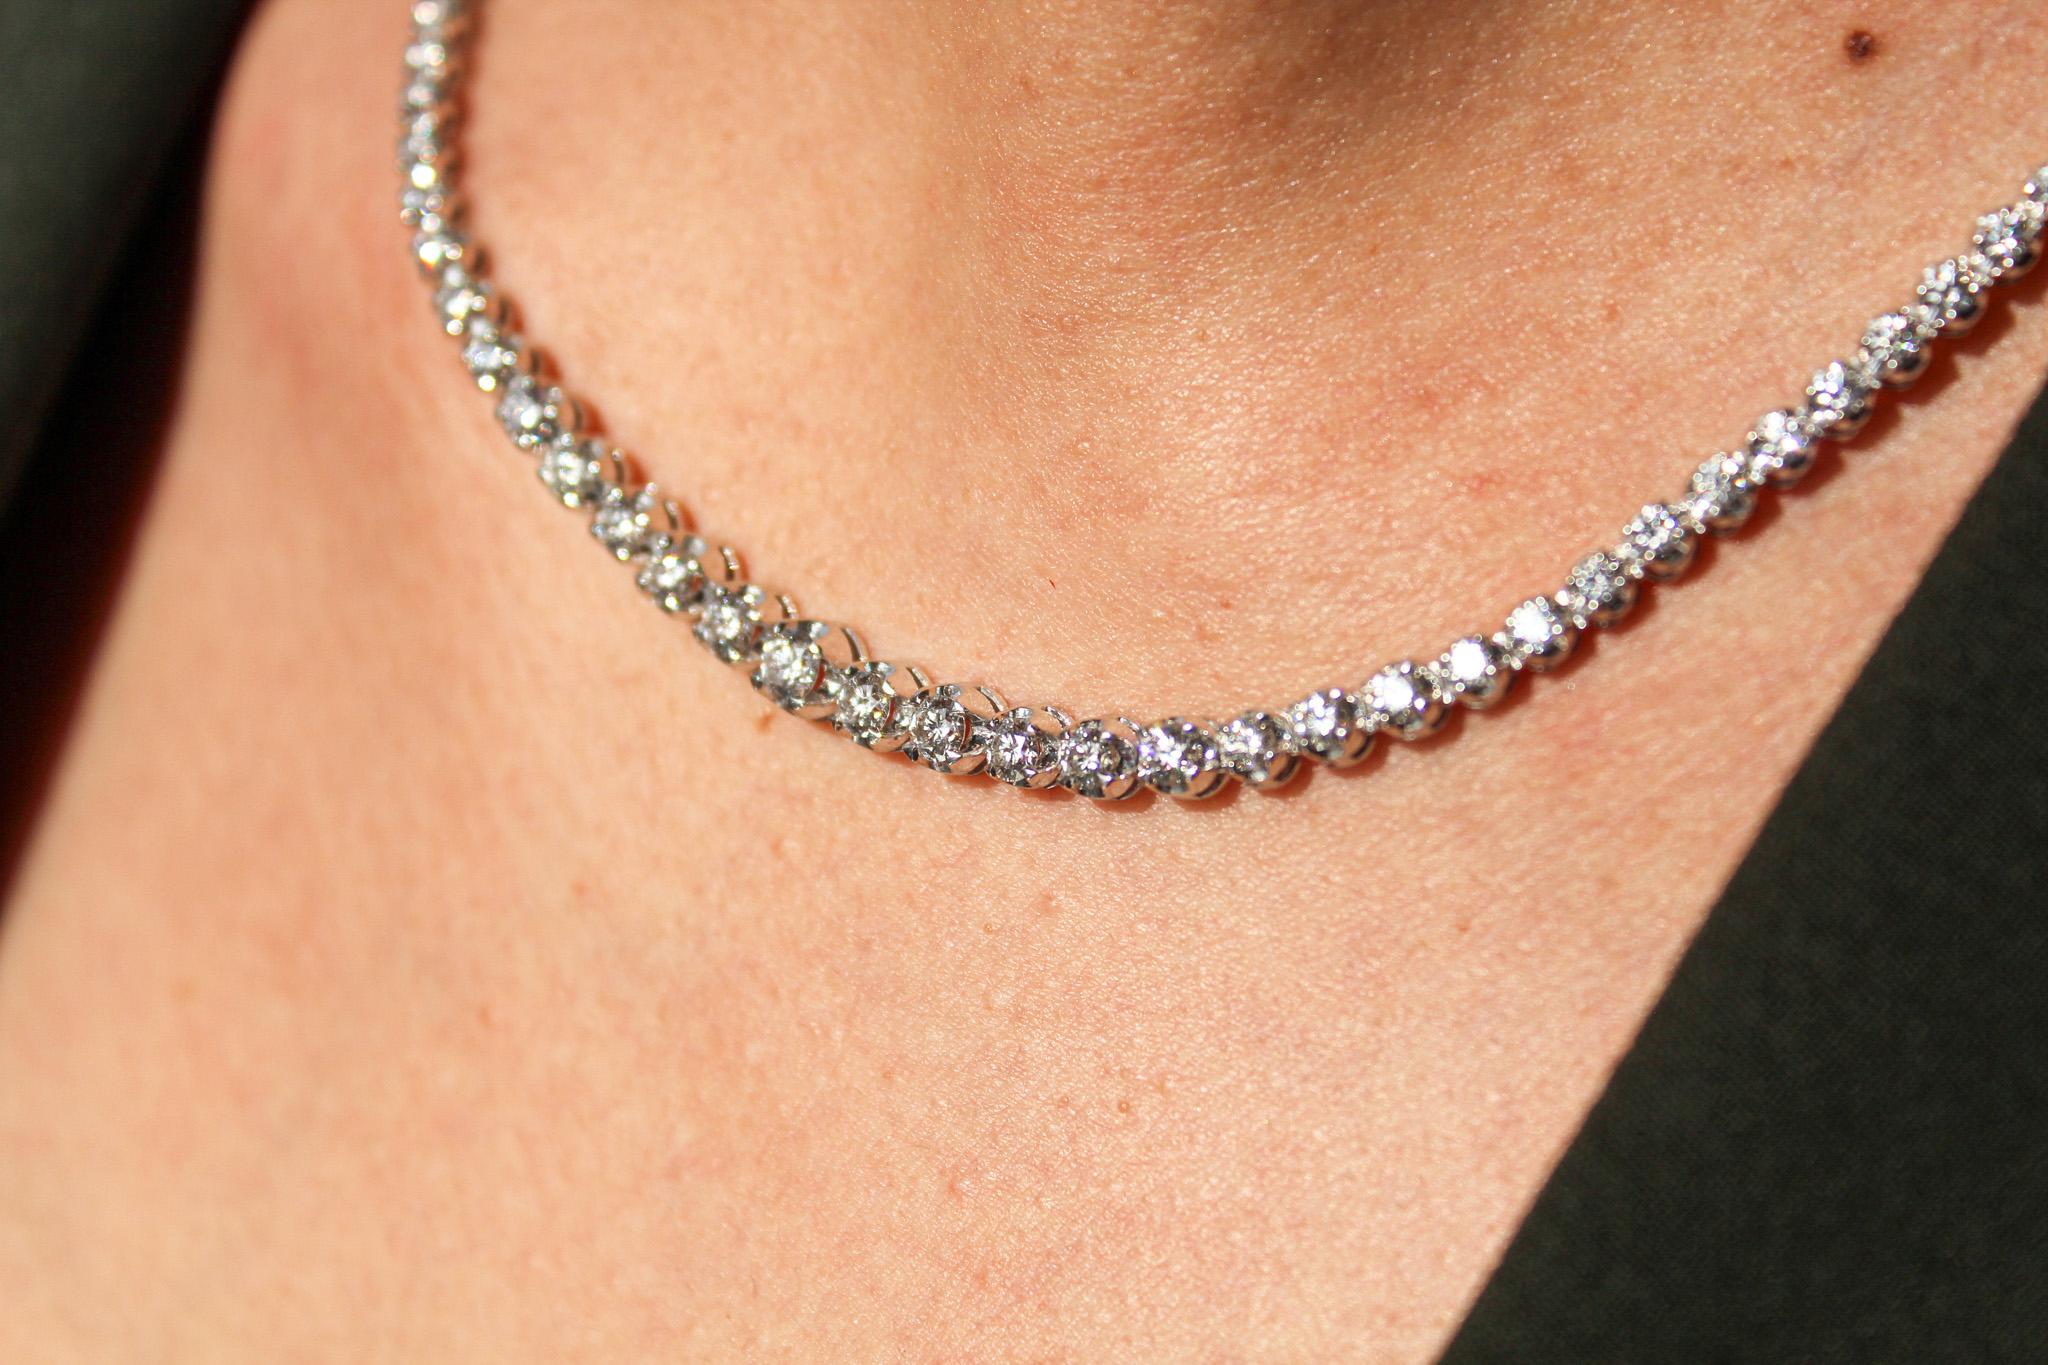 Feel like royalty with this Riviera or Rivière stunning necklace.  Set with flawless Round Diamonds in a prong setting to epitomize effortless glamour and easy sophistication. Perfect for any occasion or even just a regular day.  

Ethically Sourced